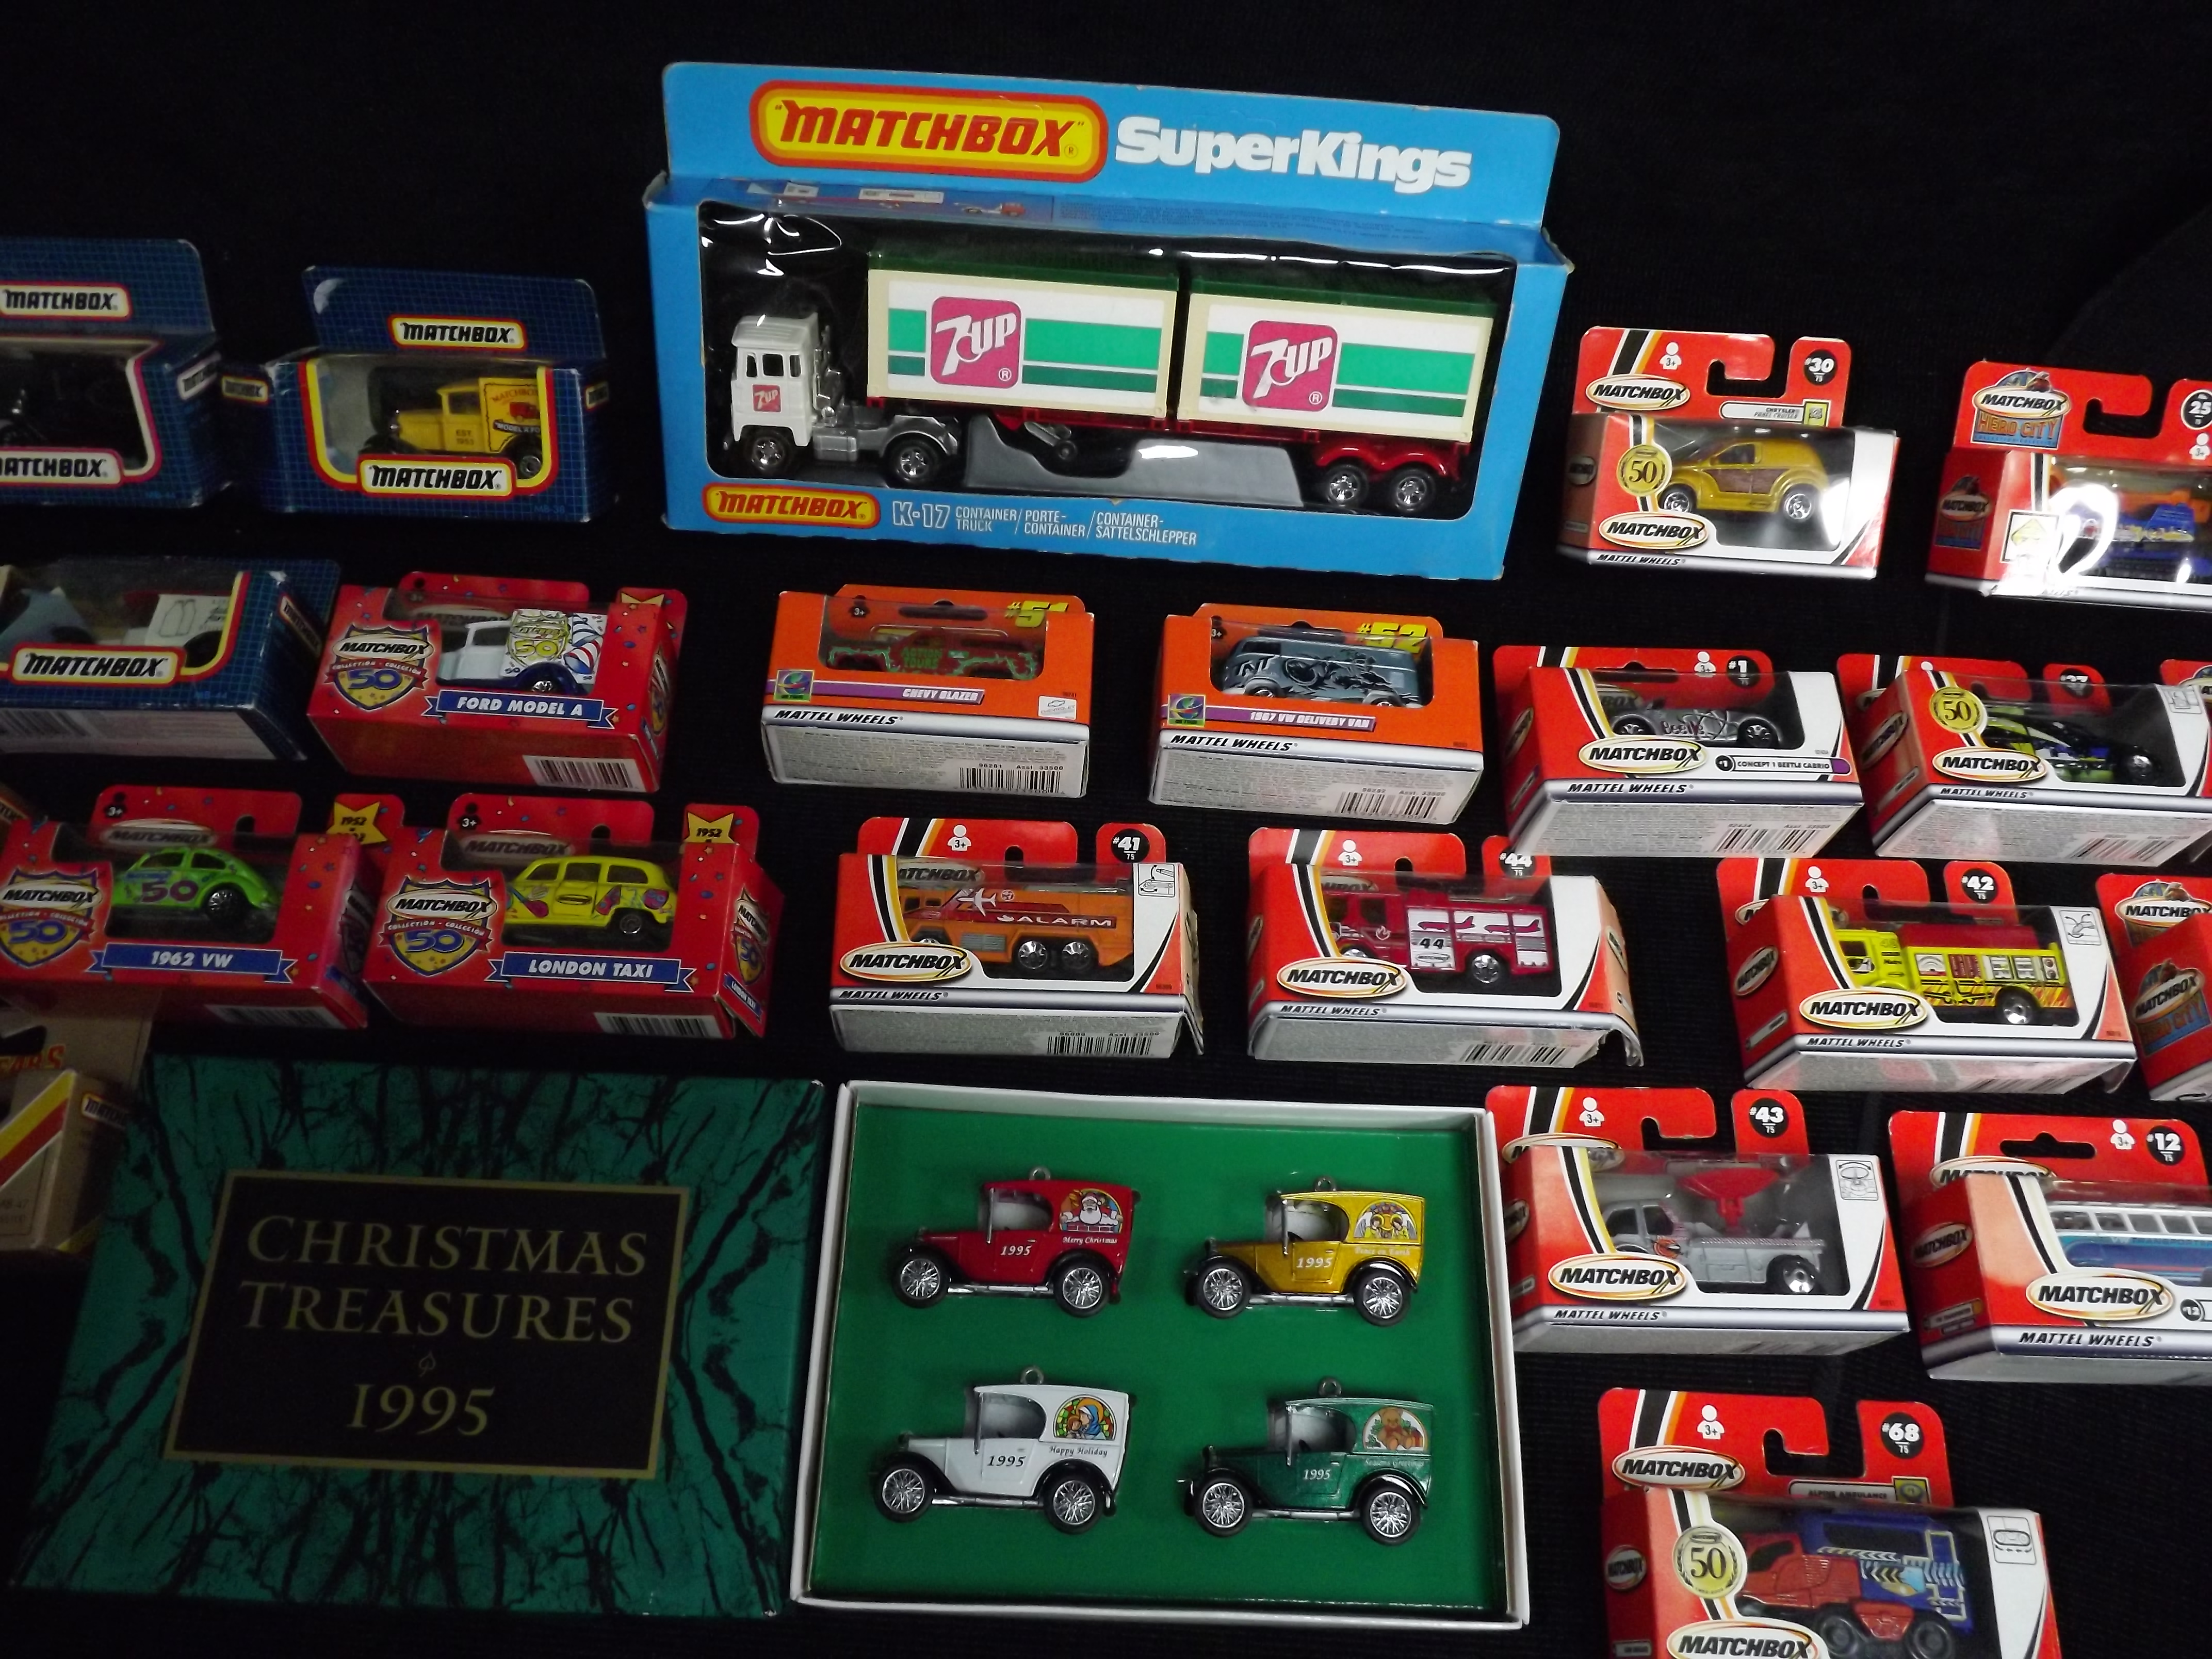 Matchbox Collection. K-17 Superkings 7UP Container Truck, 5 x Blue Check Box Delivery Vans with a - Image 3 of 4